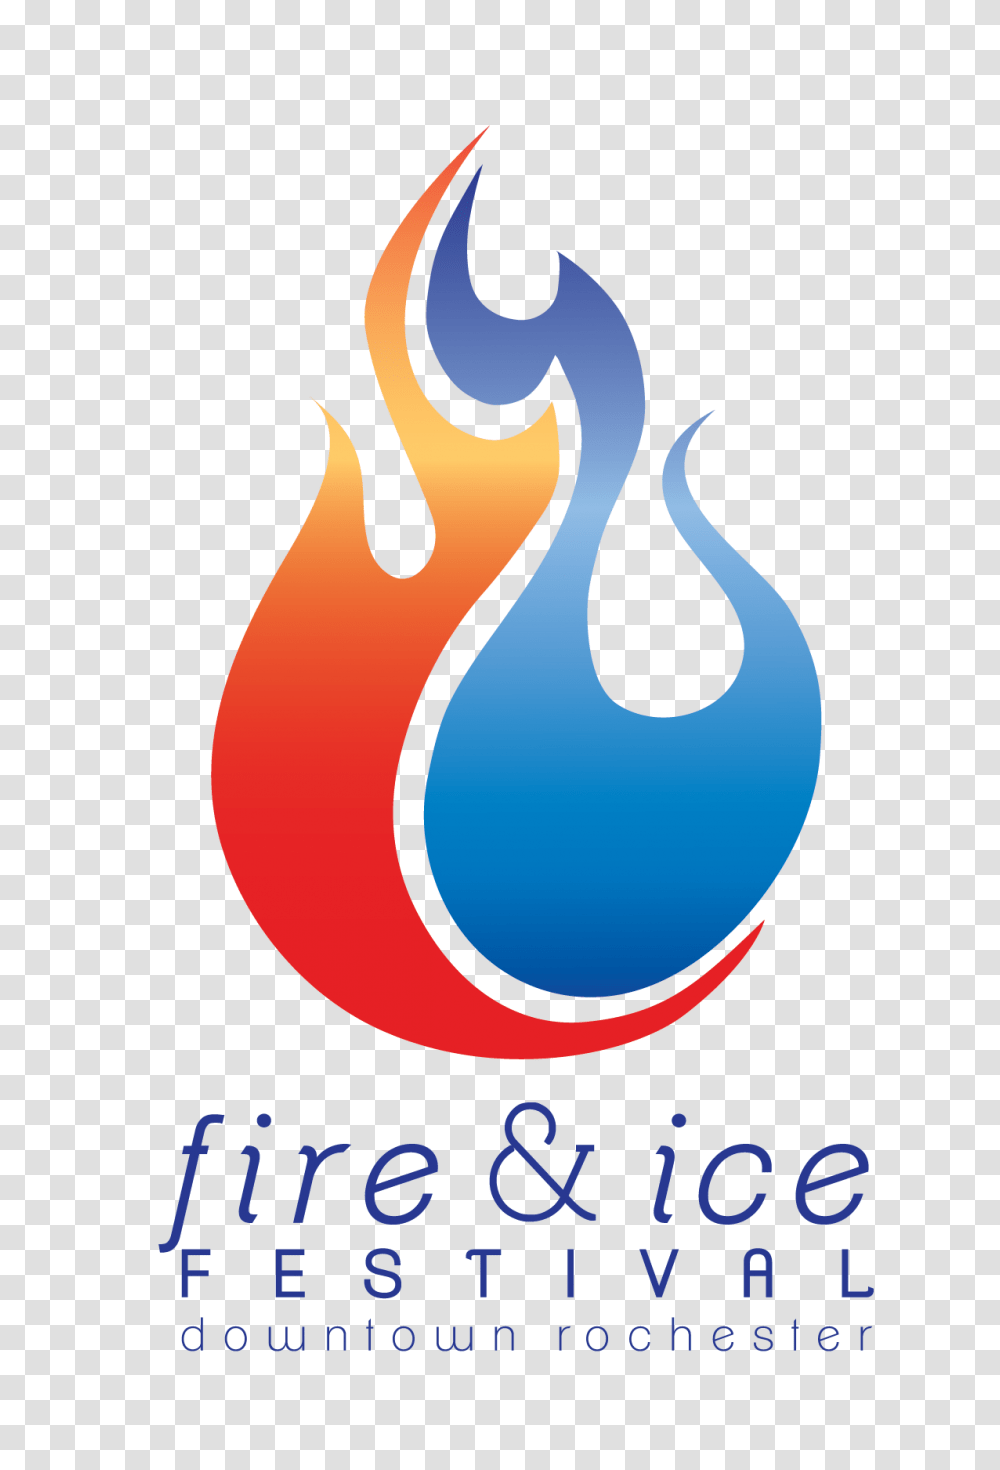 Fire And Ice Symbol Full Size Download Seekpng Fire, Logo, Trademark, Flame, Text Transparent Png